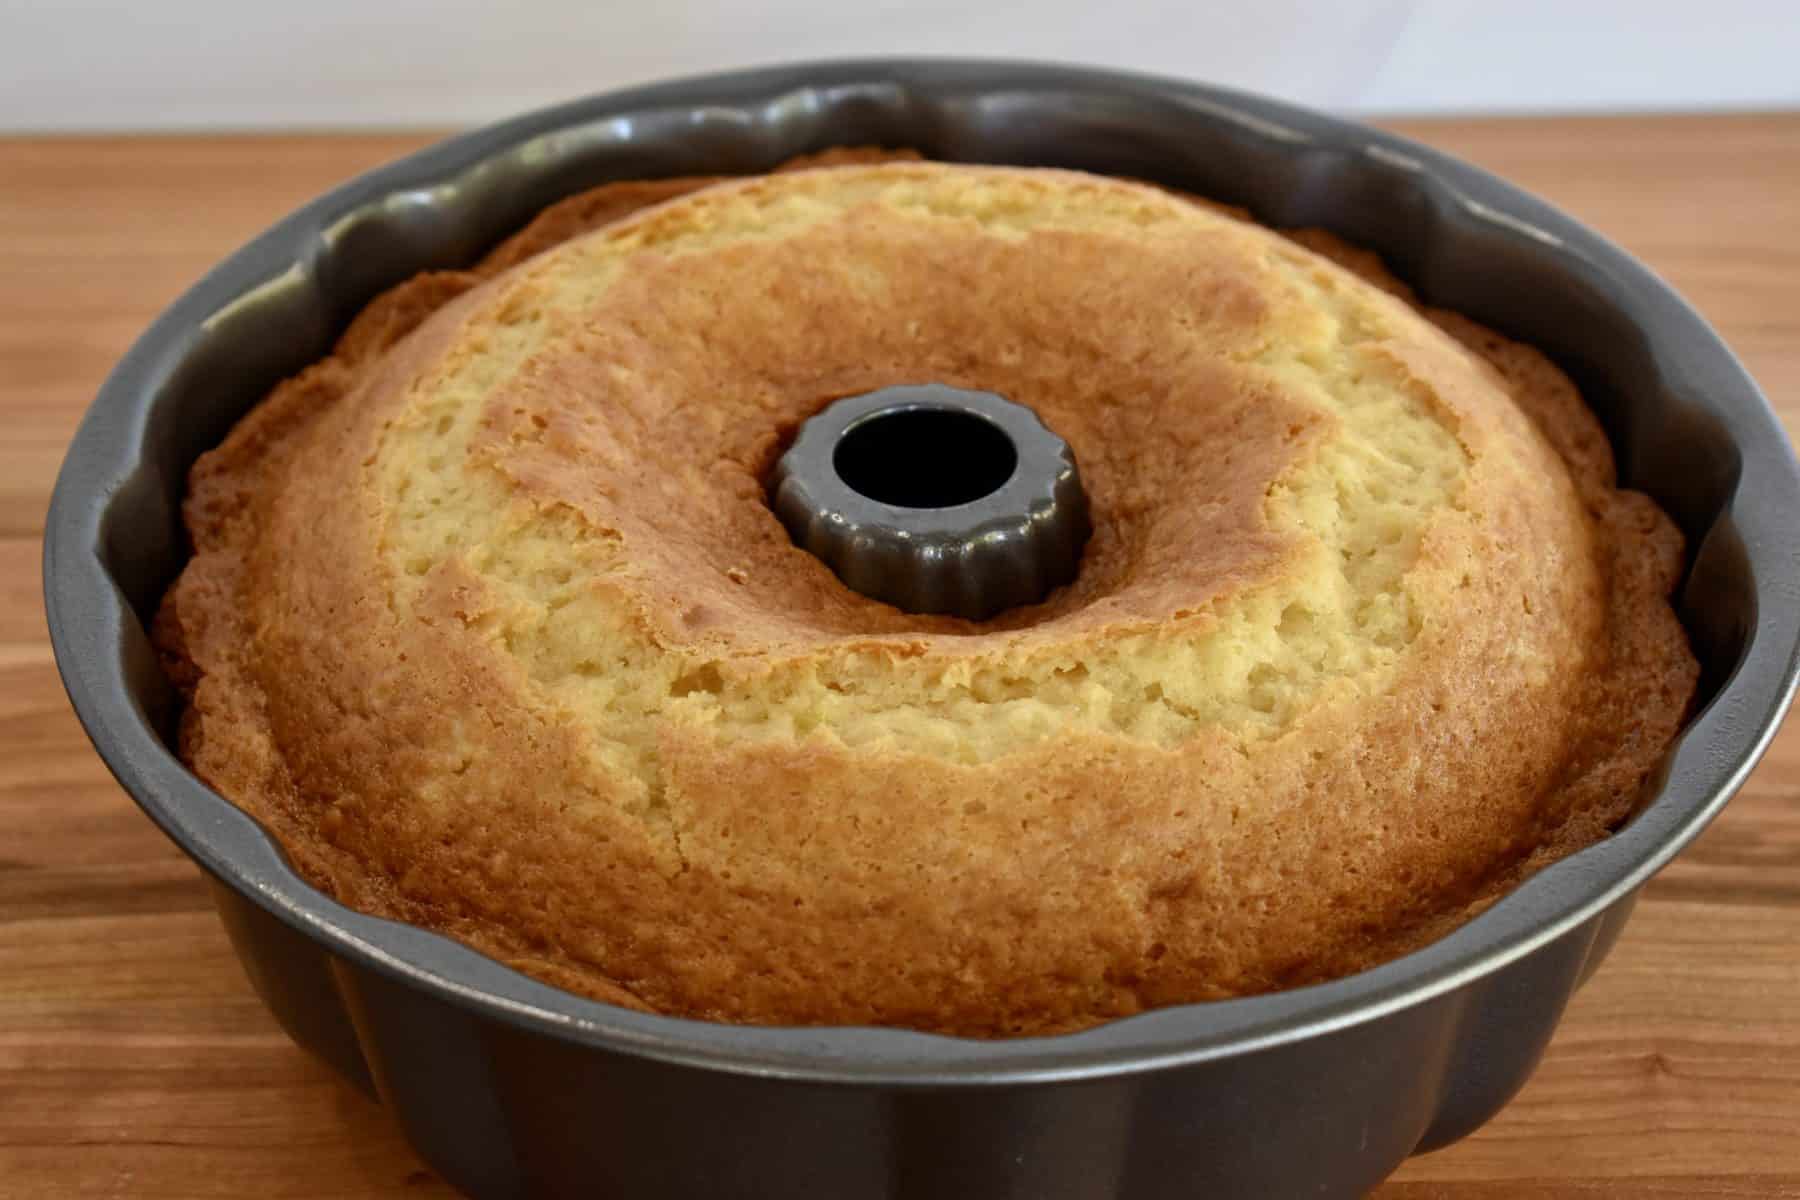 cooked pineapple cake in the Bundt Cake pan on a wooden surface. 